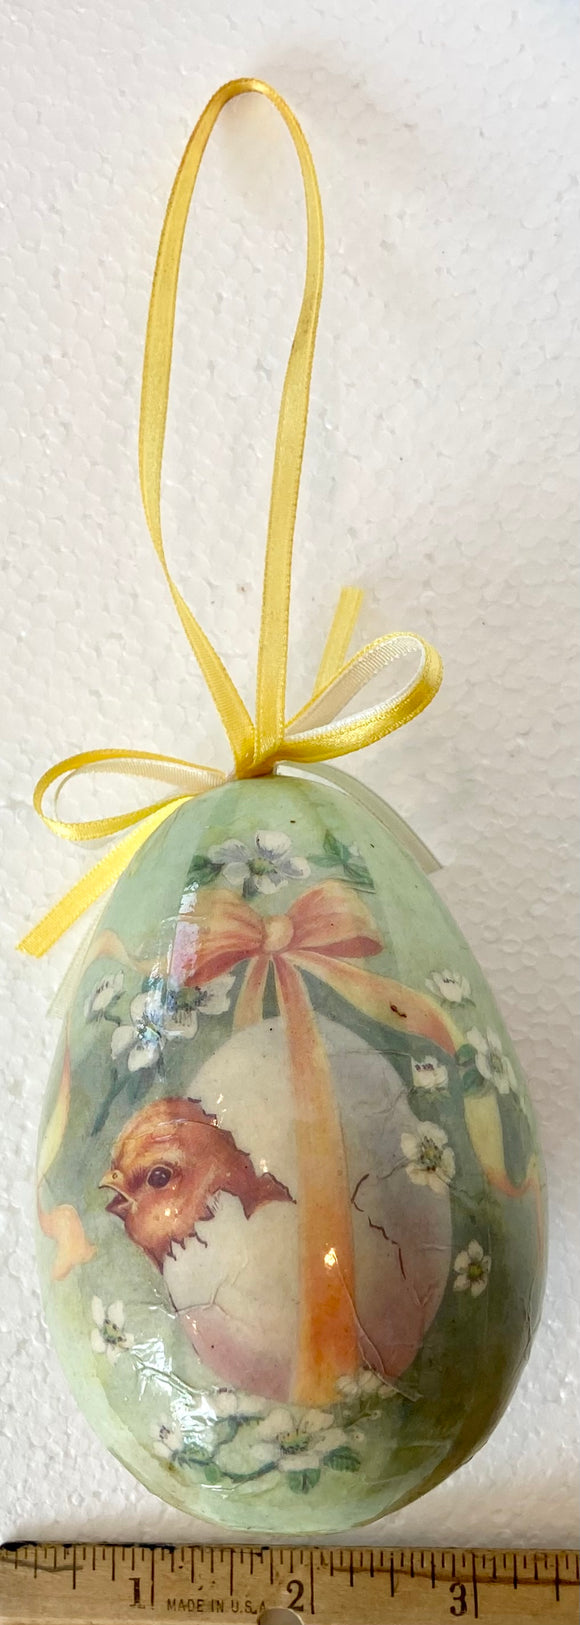 Paper Machee Chicken cracking Egg Easter Egg Ornament - German Specialty Imports llc